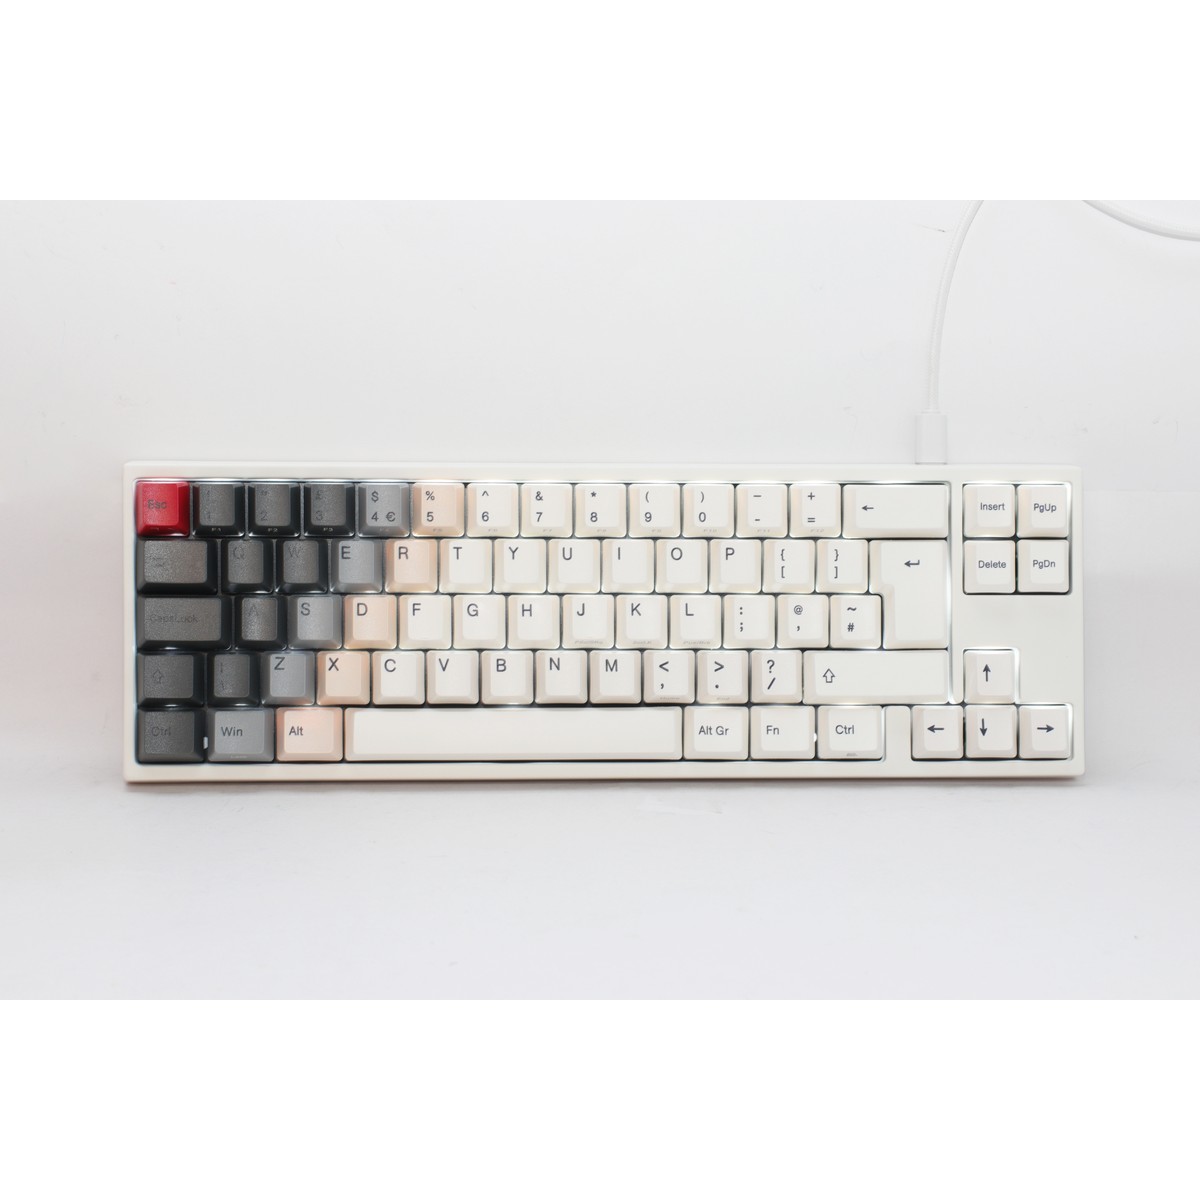 Ducky x Varmilo MIYA 69 Pro Holy Flame Mechanical Gaming Keyboard Cherry MX Silent Red Backlit White - White/Grey/Red